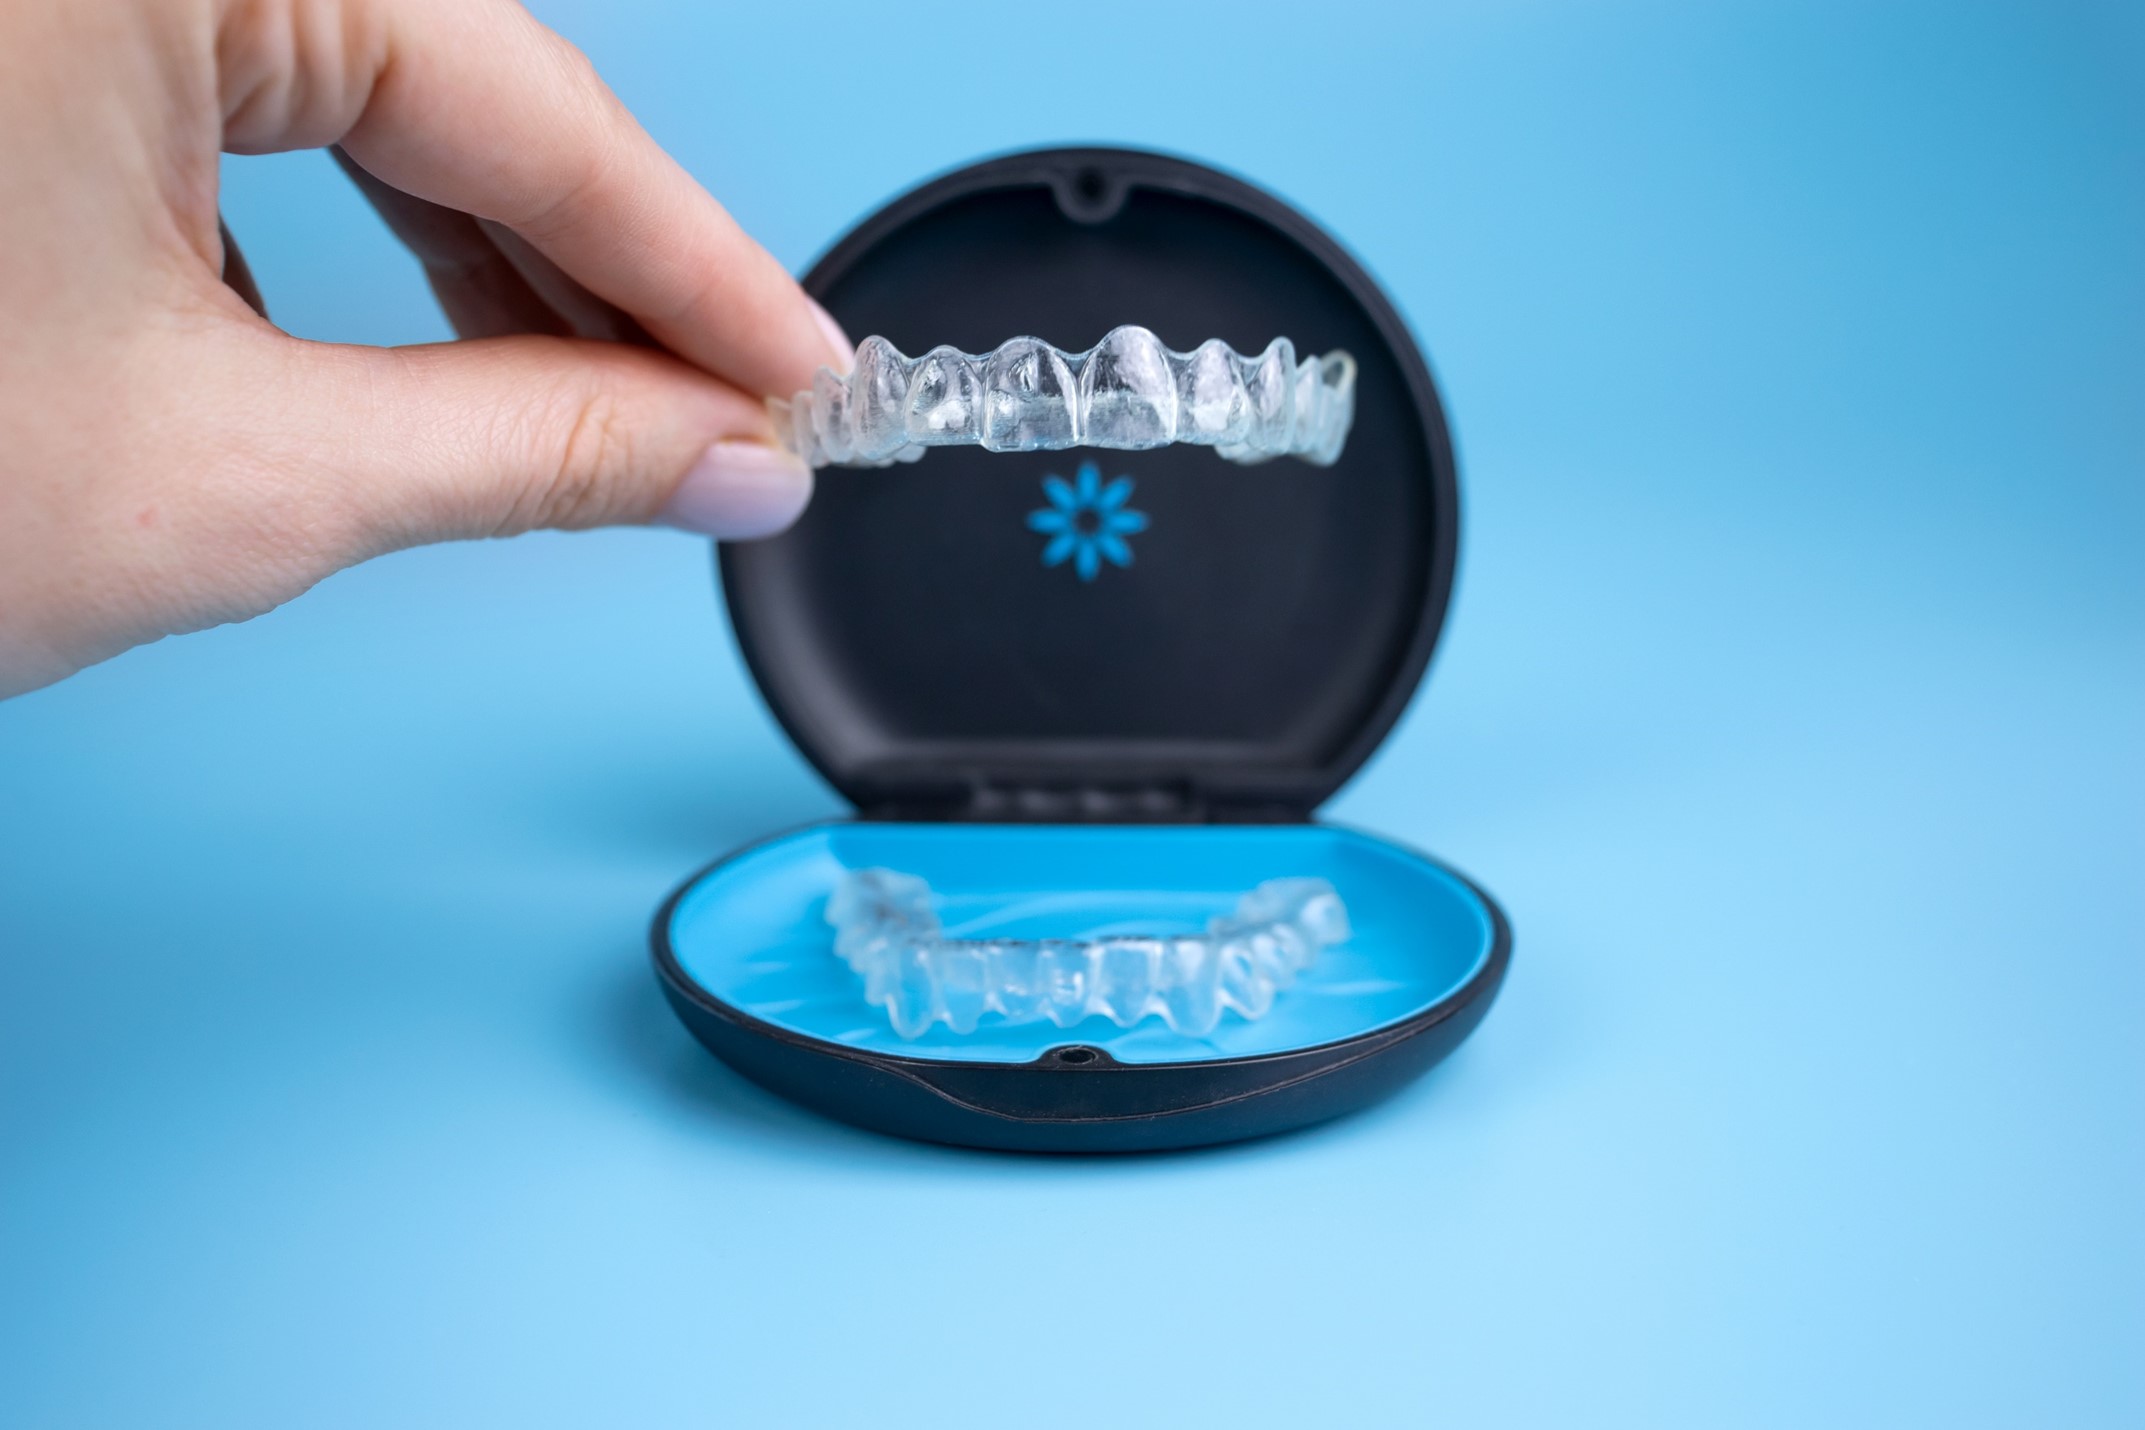 How You Can Accidentally Ruin Your Invisalign Treatment